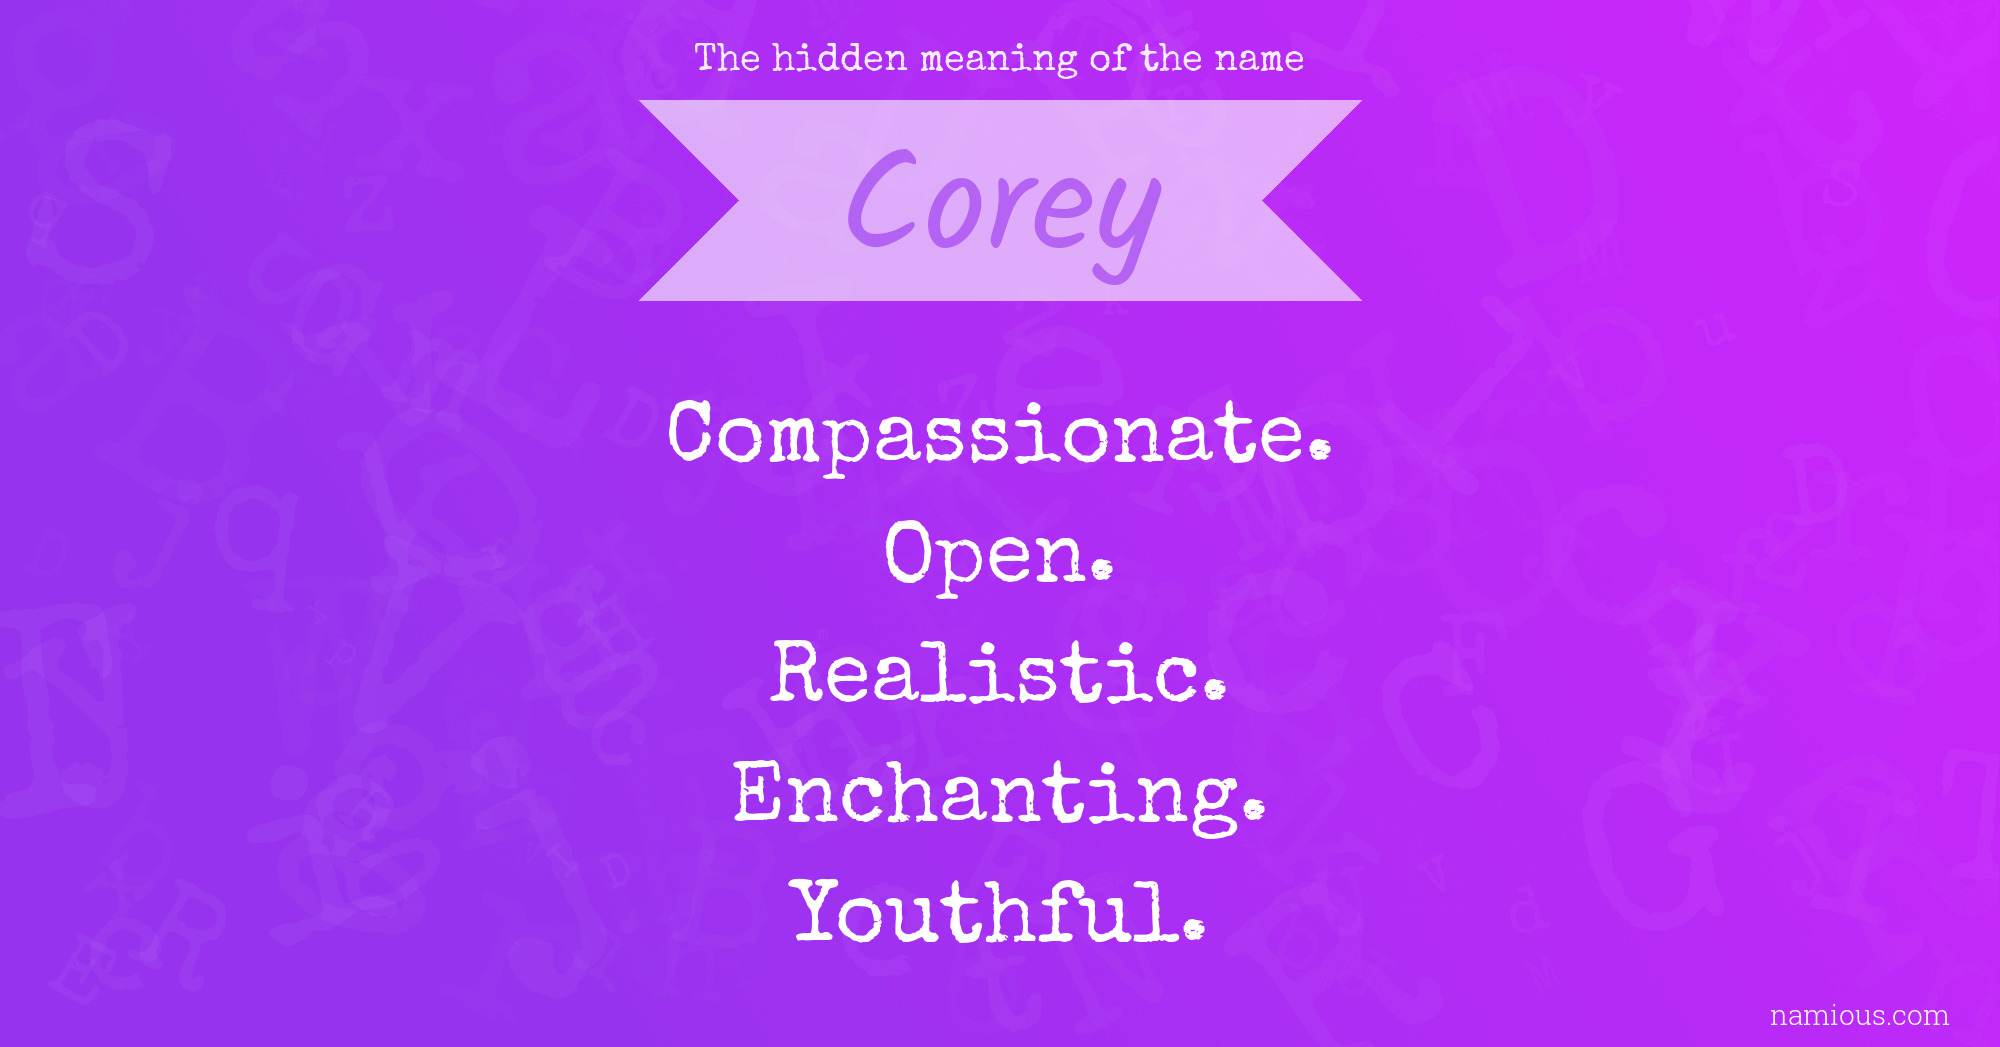 The hidden meaning of the name Corey